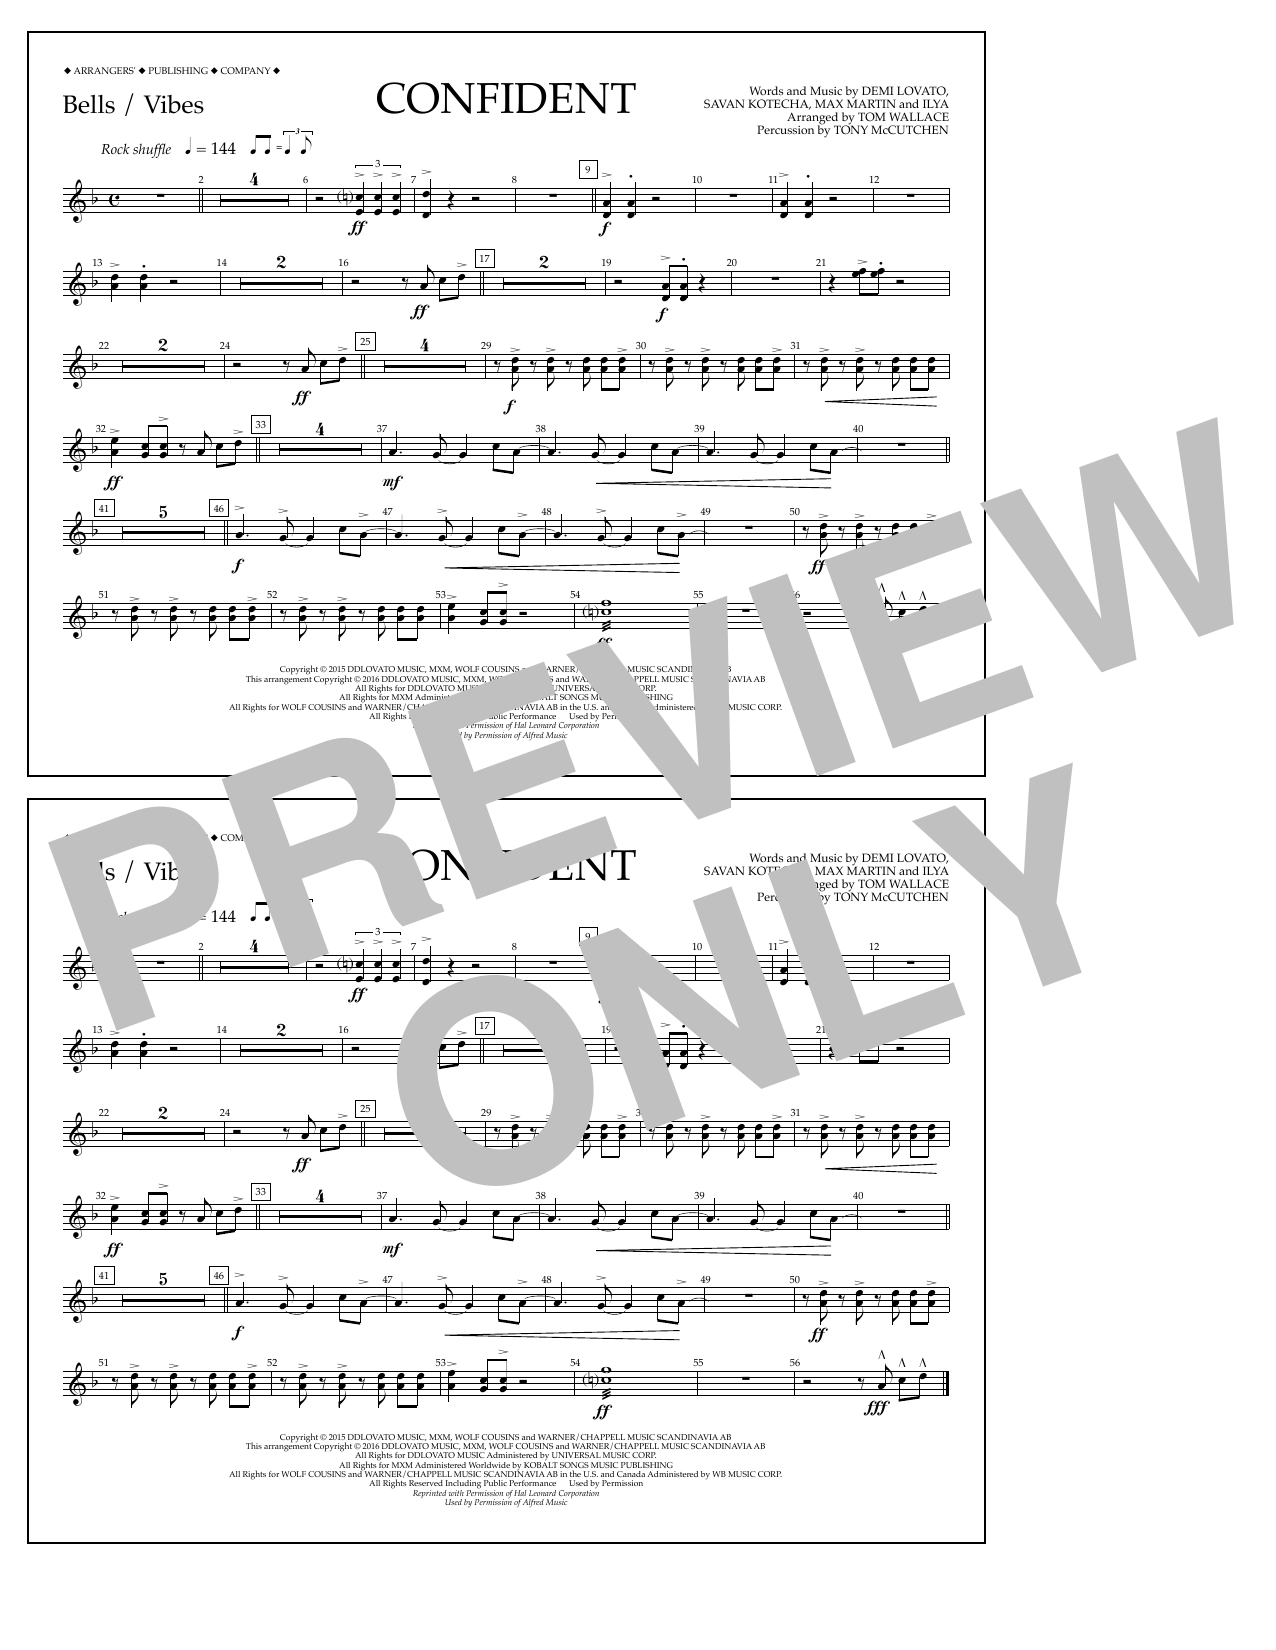 Download Tom Wallace Confident - Bells/Vibes Sheet Music